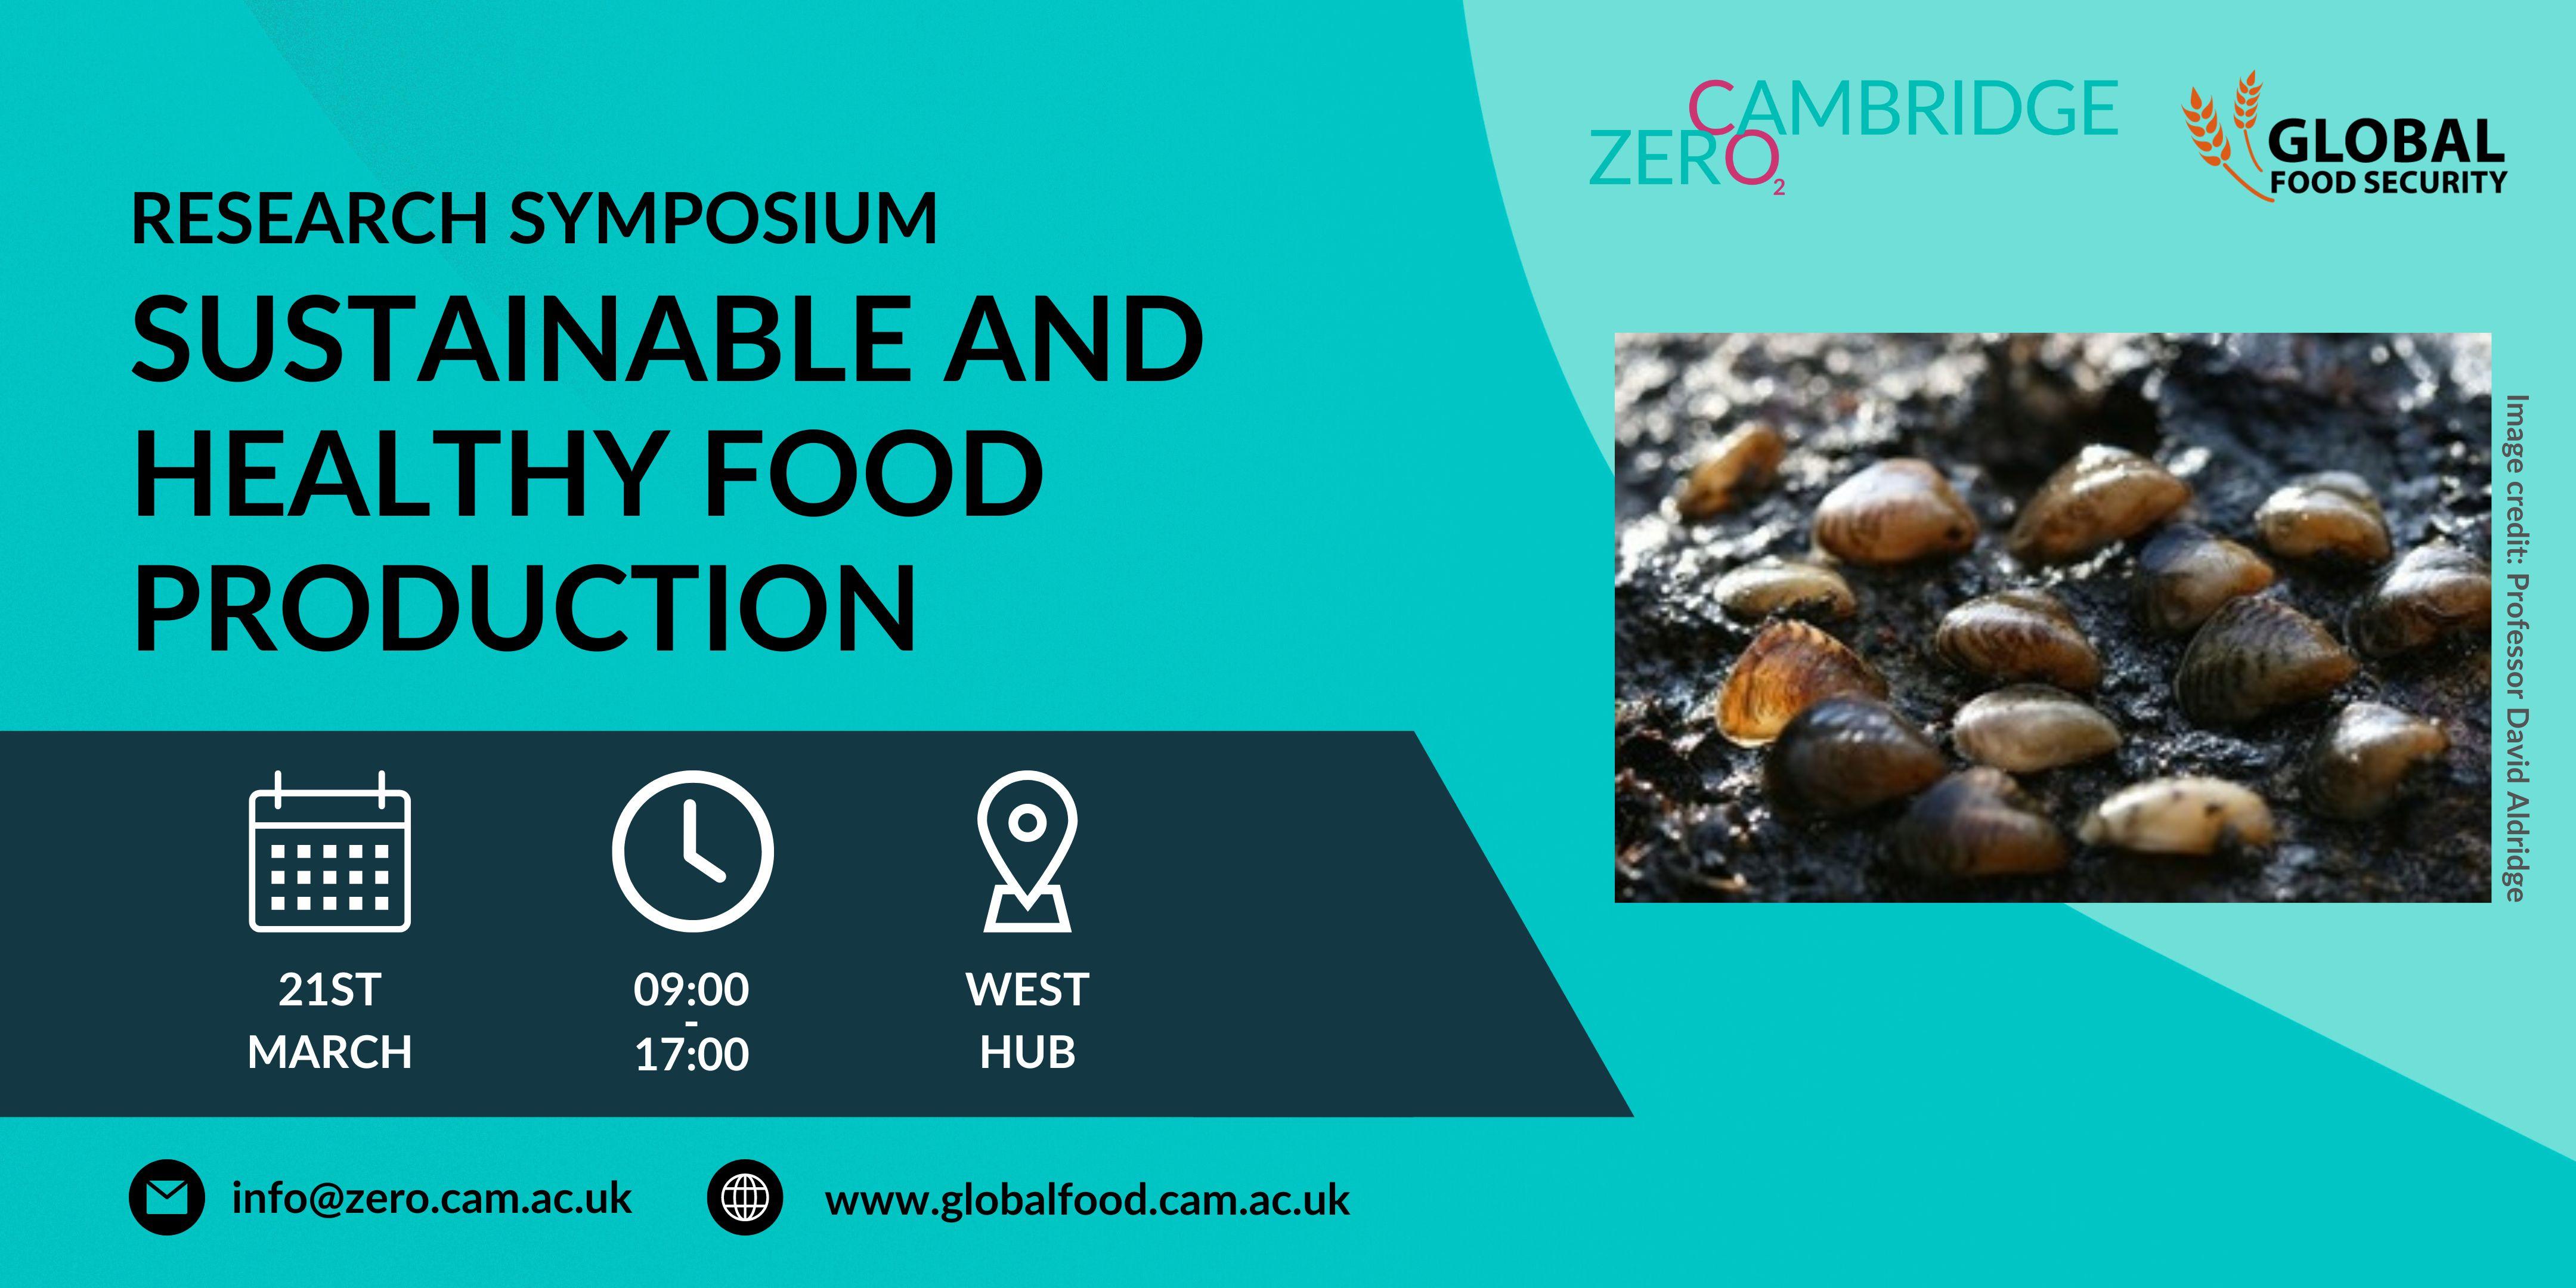 Sustainable food production 21st March at West Hub